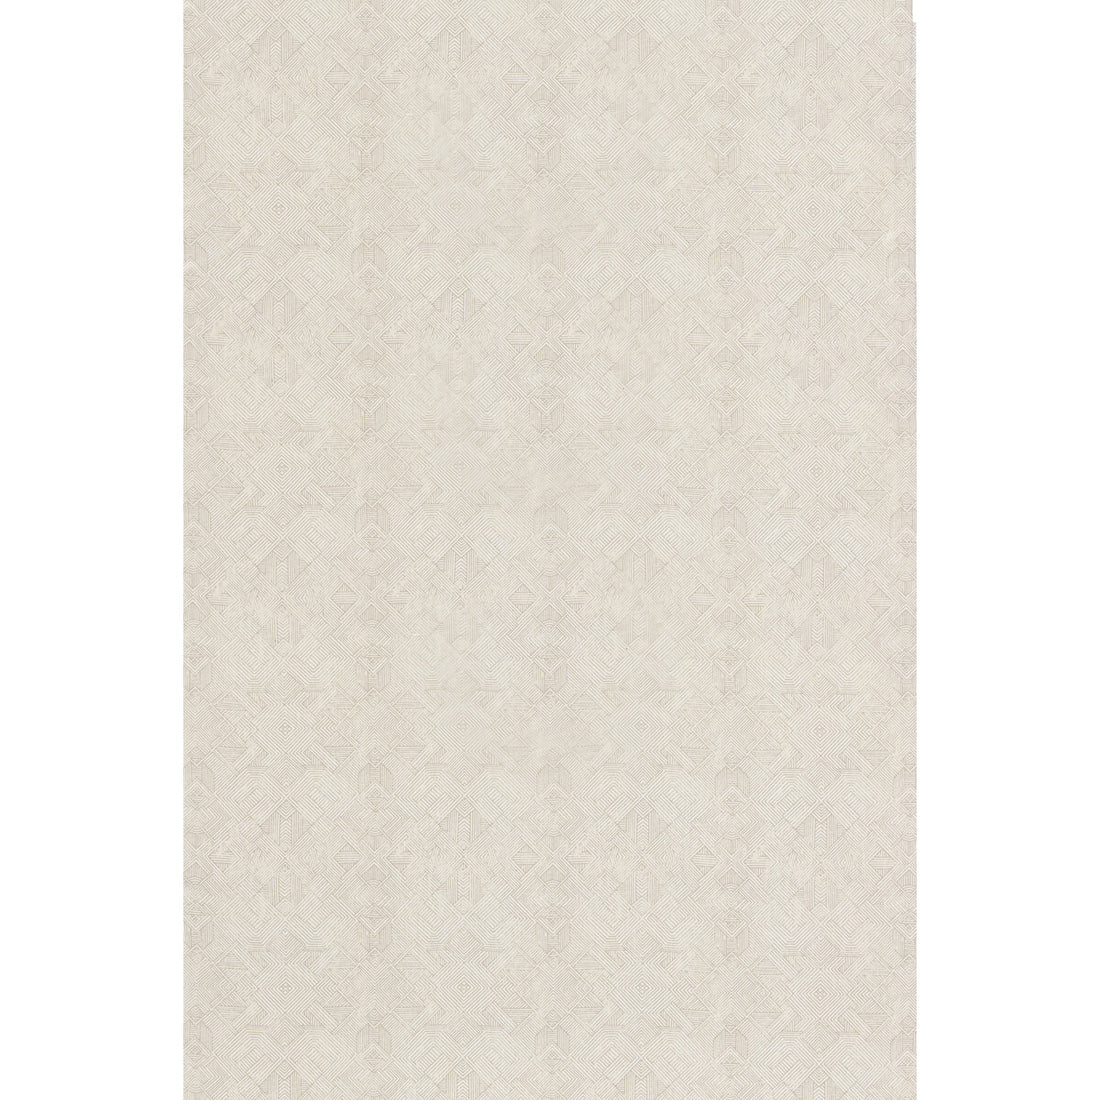 Mondello fabric in ivory color - pattern ED75046.104.0 - by Threads in the Faraway collection